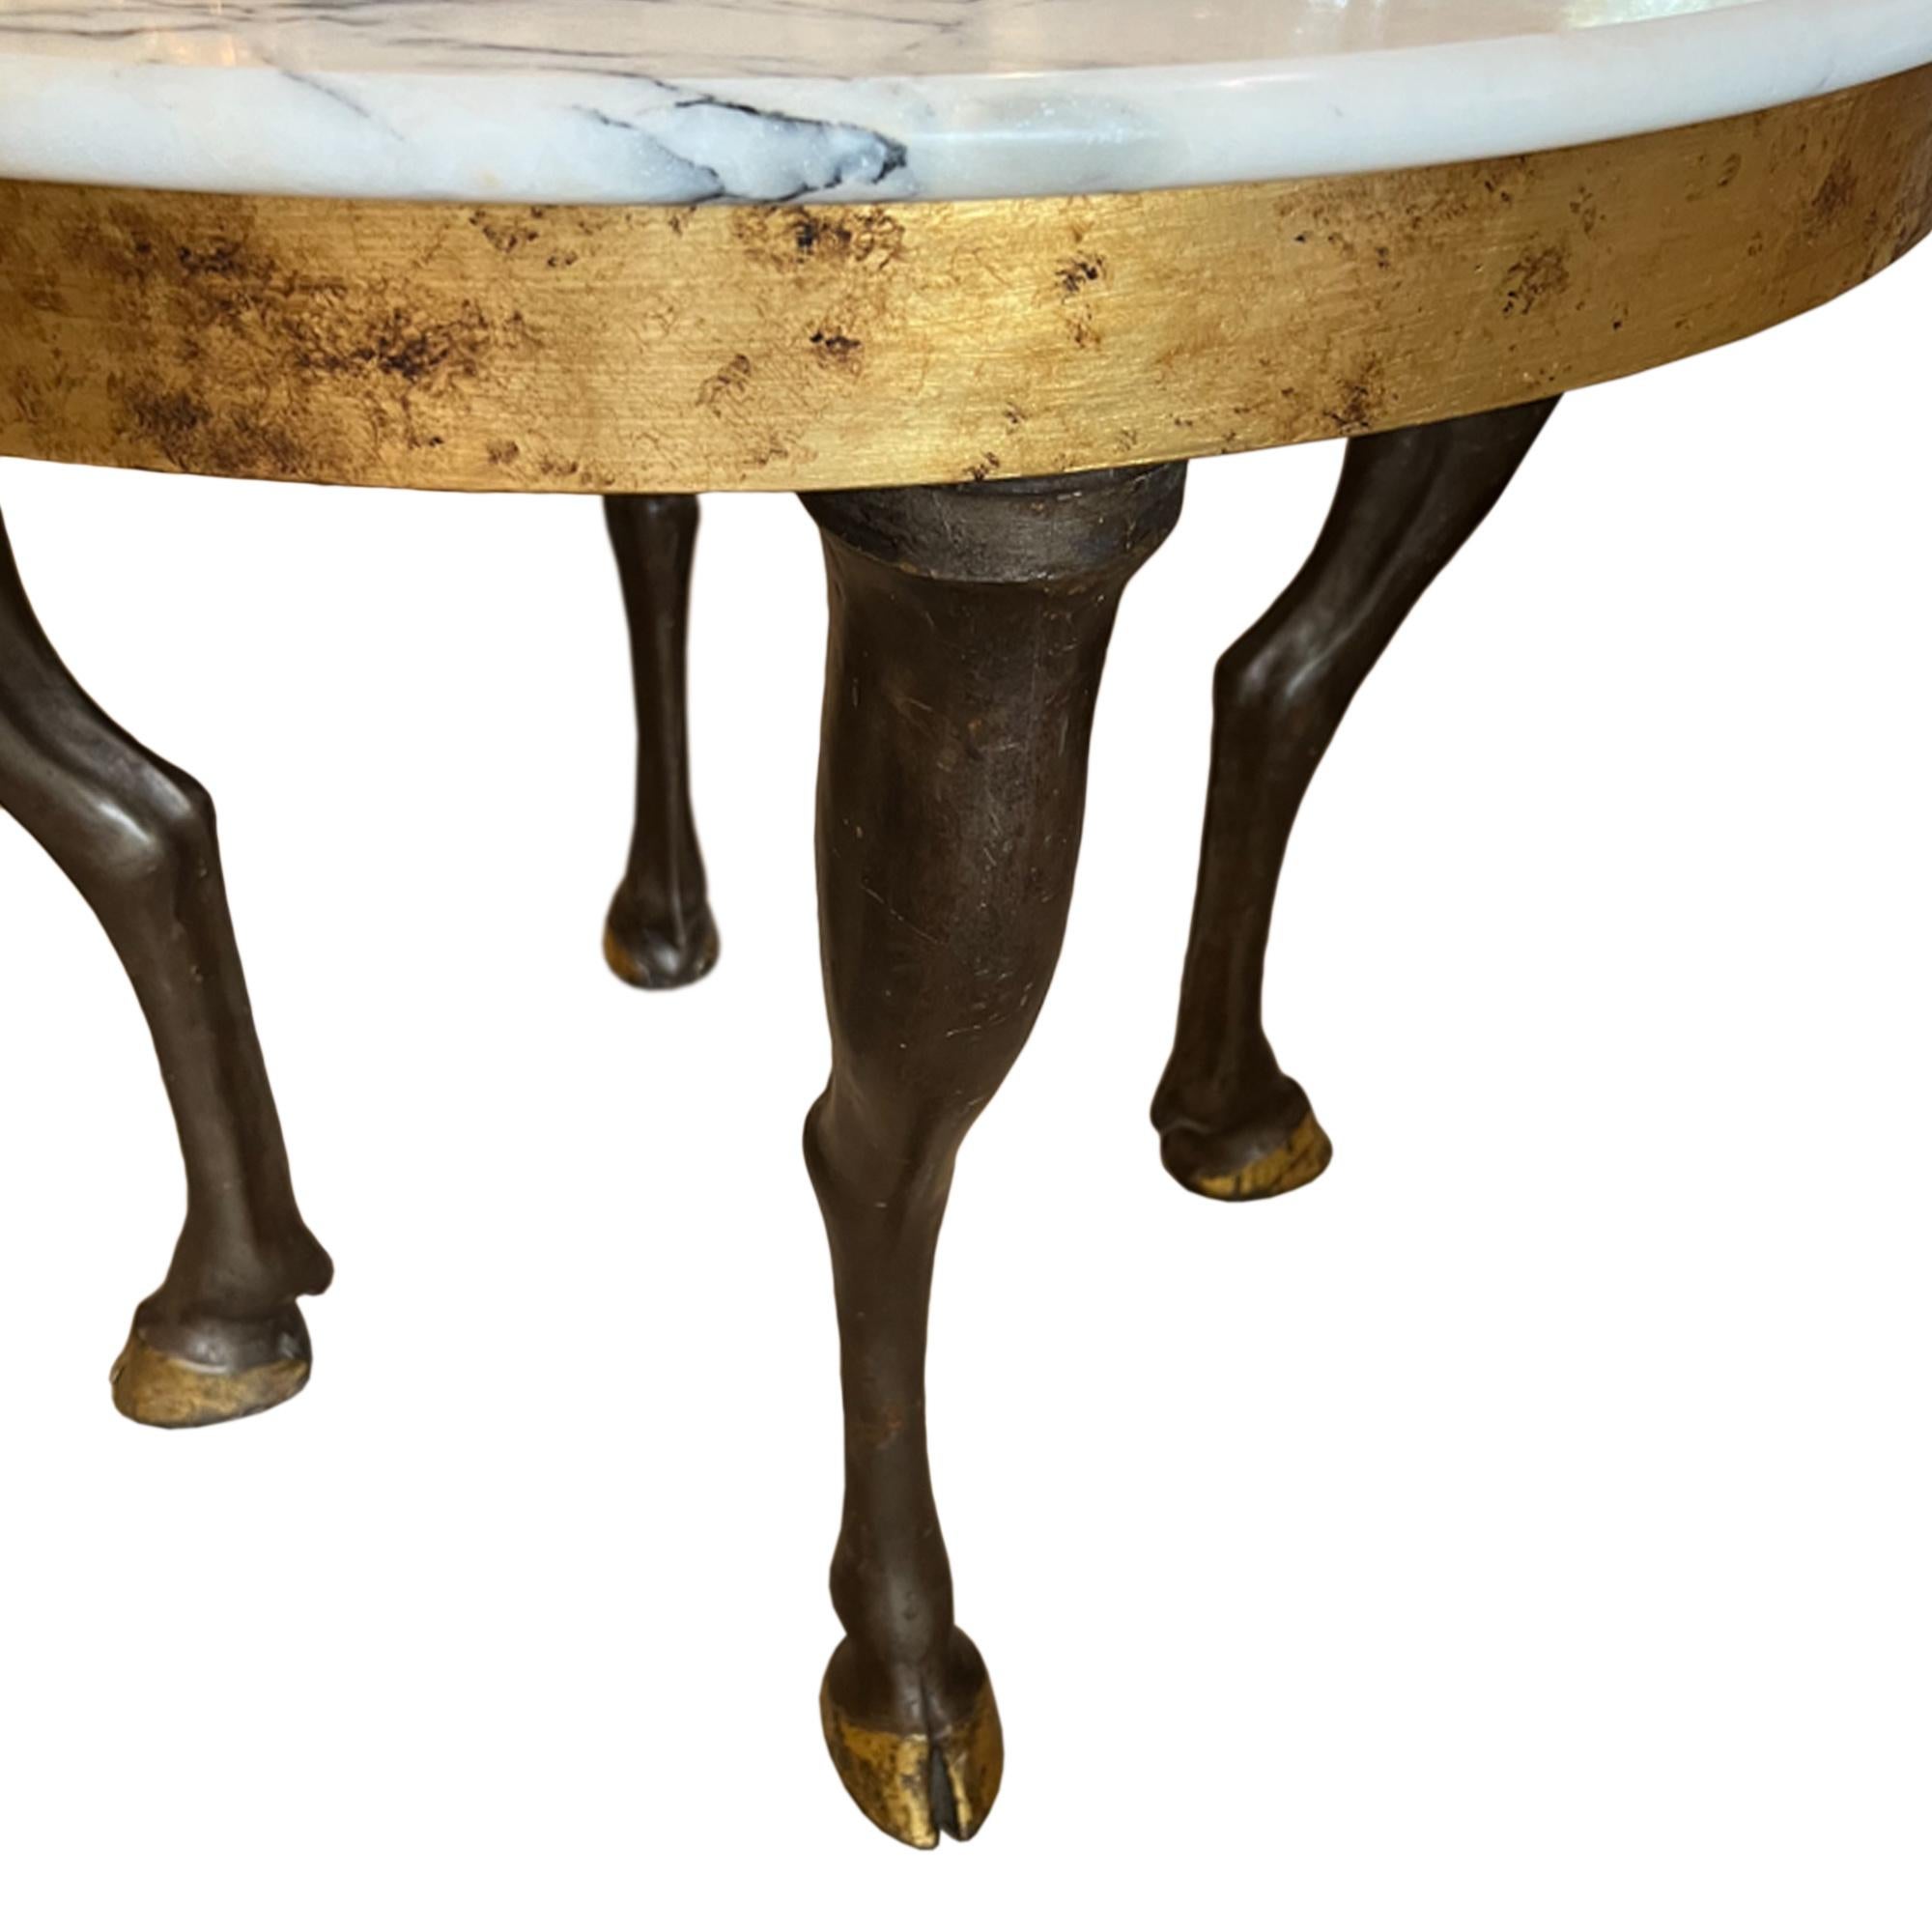 A fabulous table!

Made in France in the late 1960s - The beautful later marble top is supported by horse's legs, with gilded hooves. Please take a look at all our pictures to see the detail.

A great example of unique mid century design.